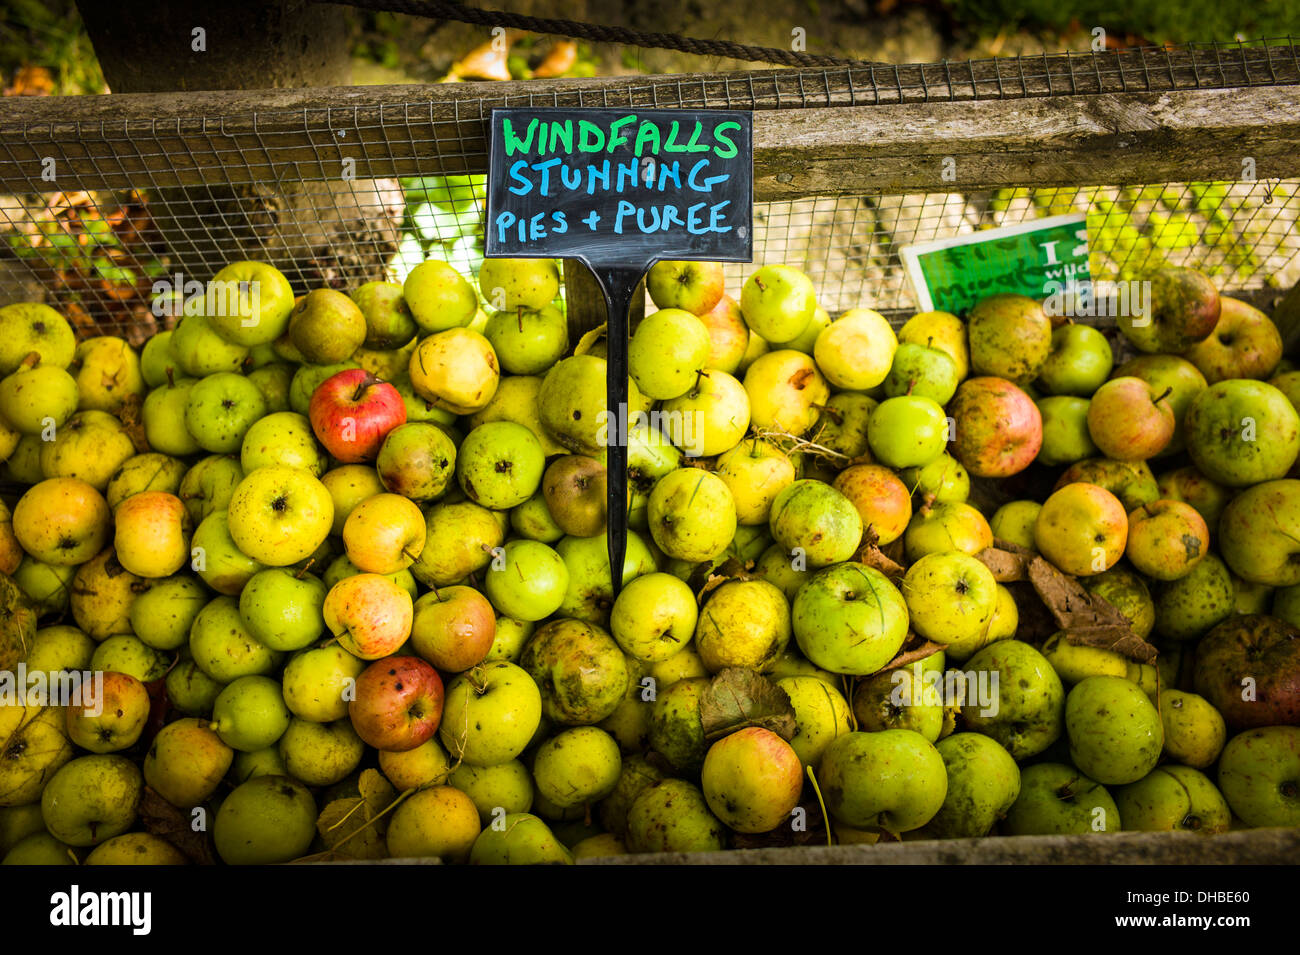 SIGN describing possible use for windfall apples in UK in November Stock Photo